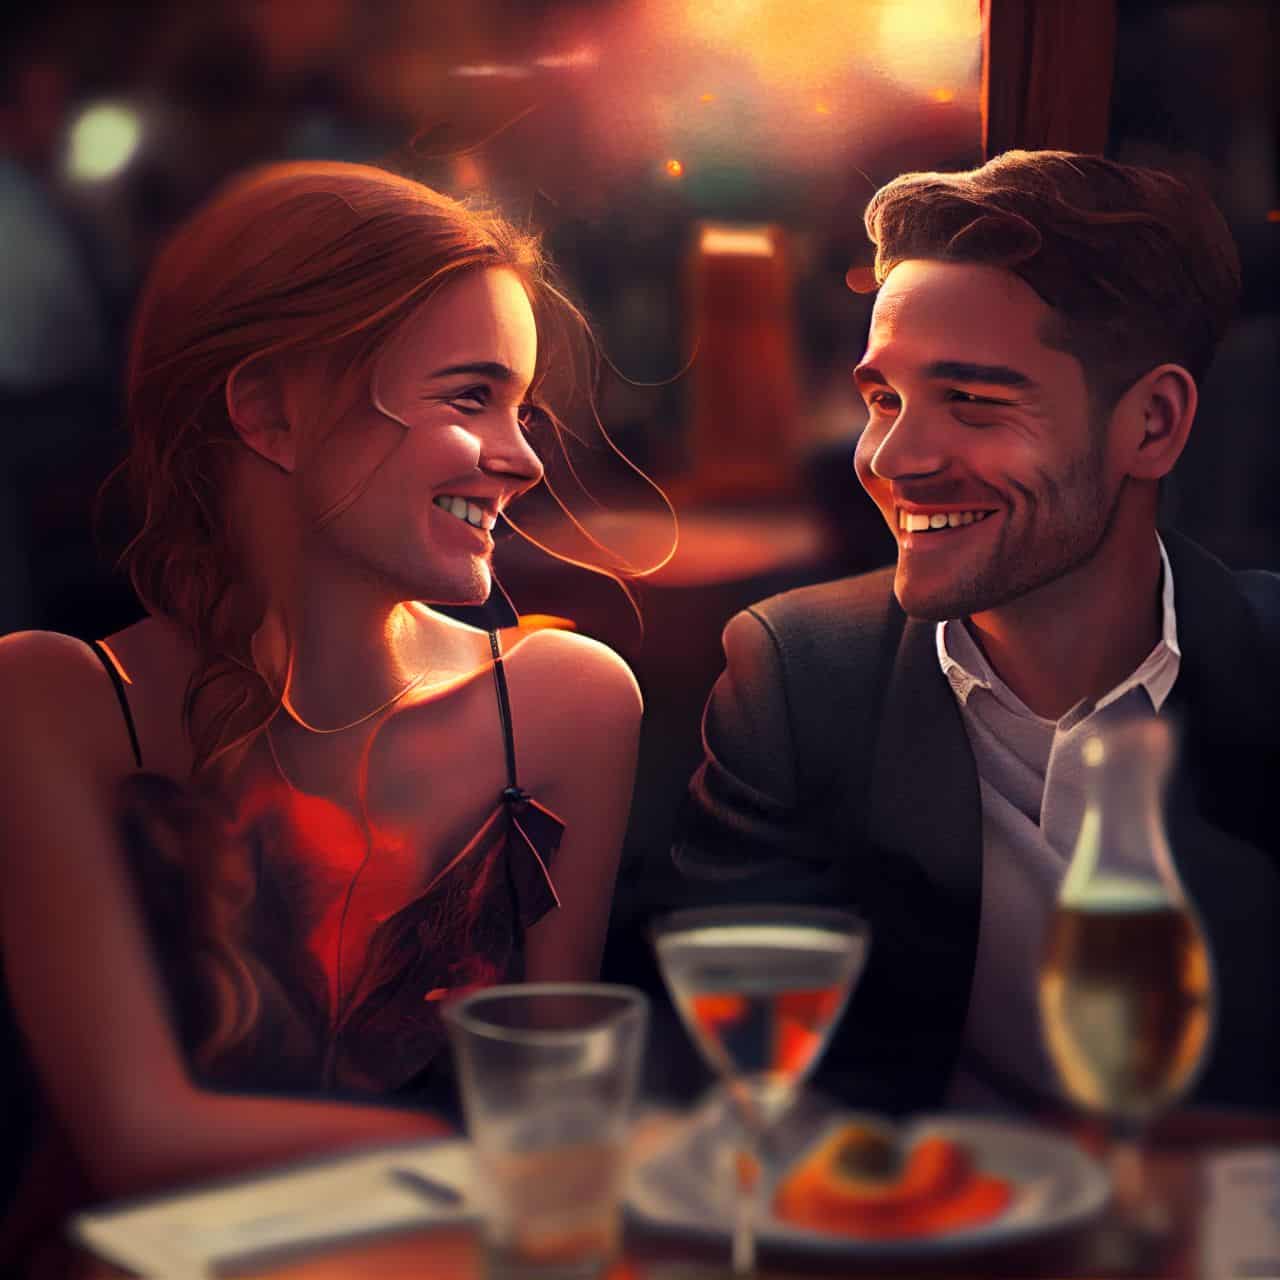 redhead woman on a date